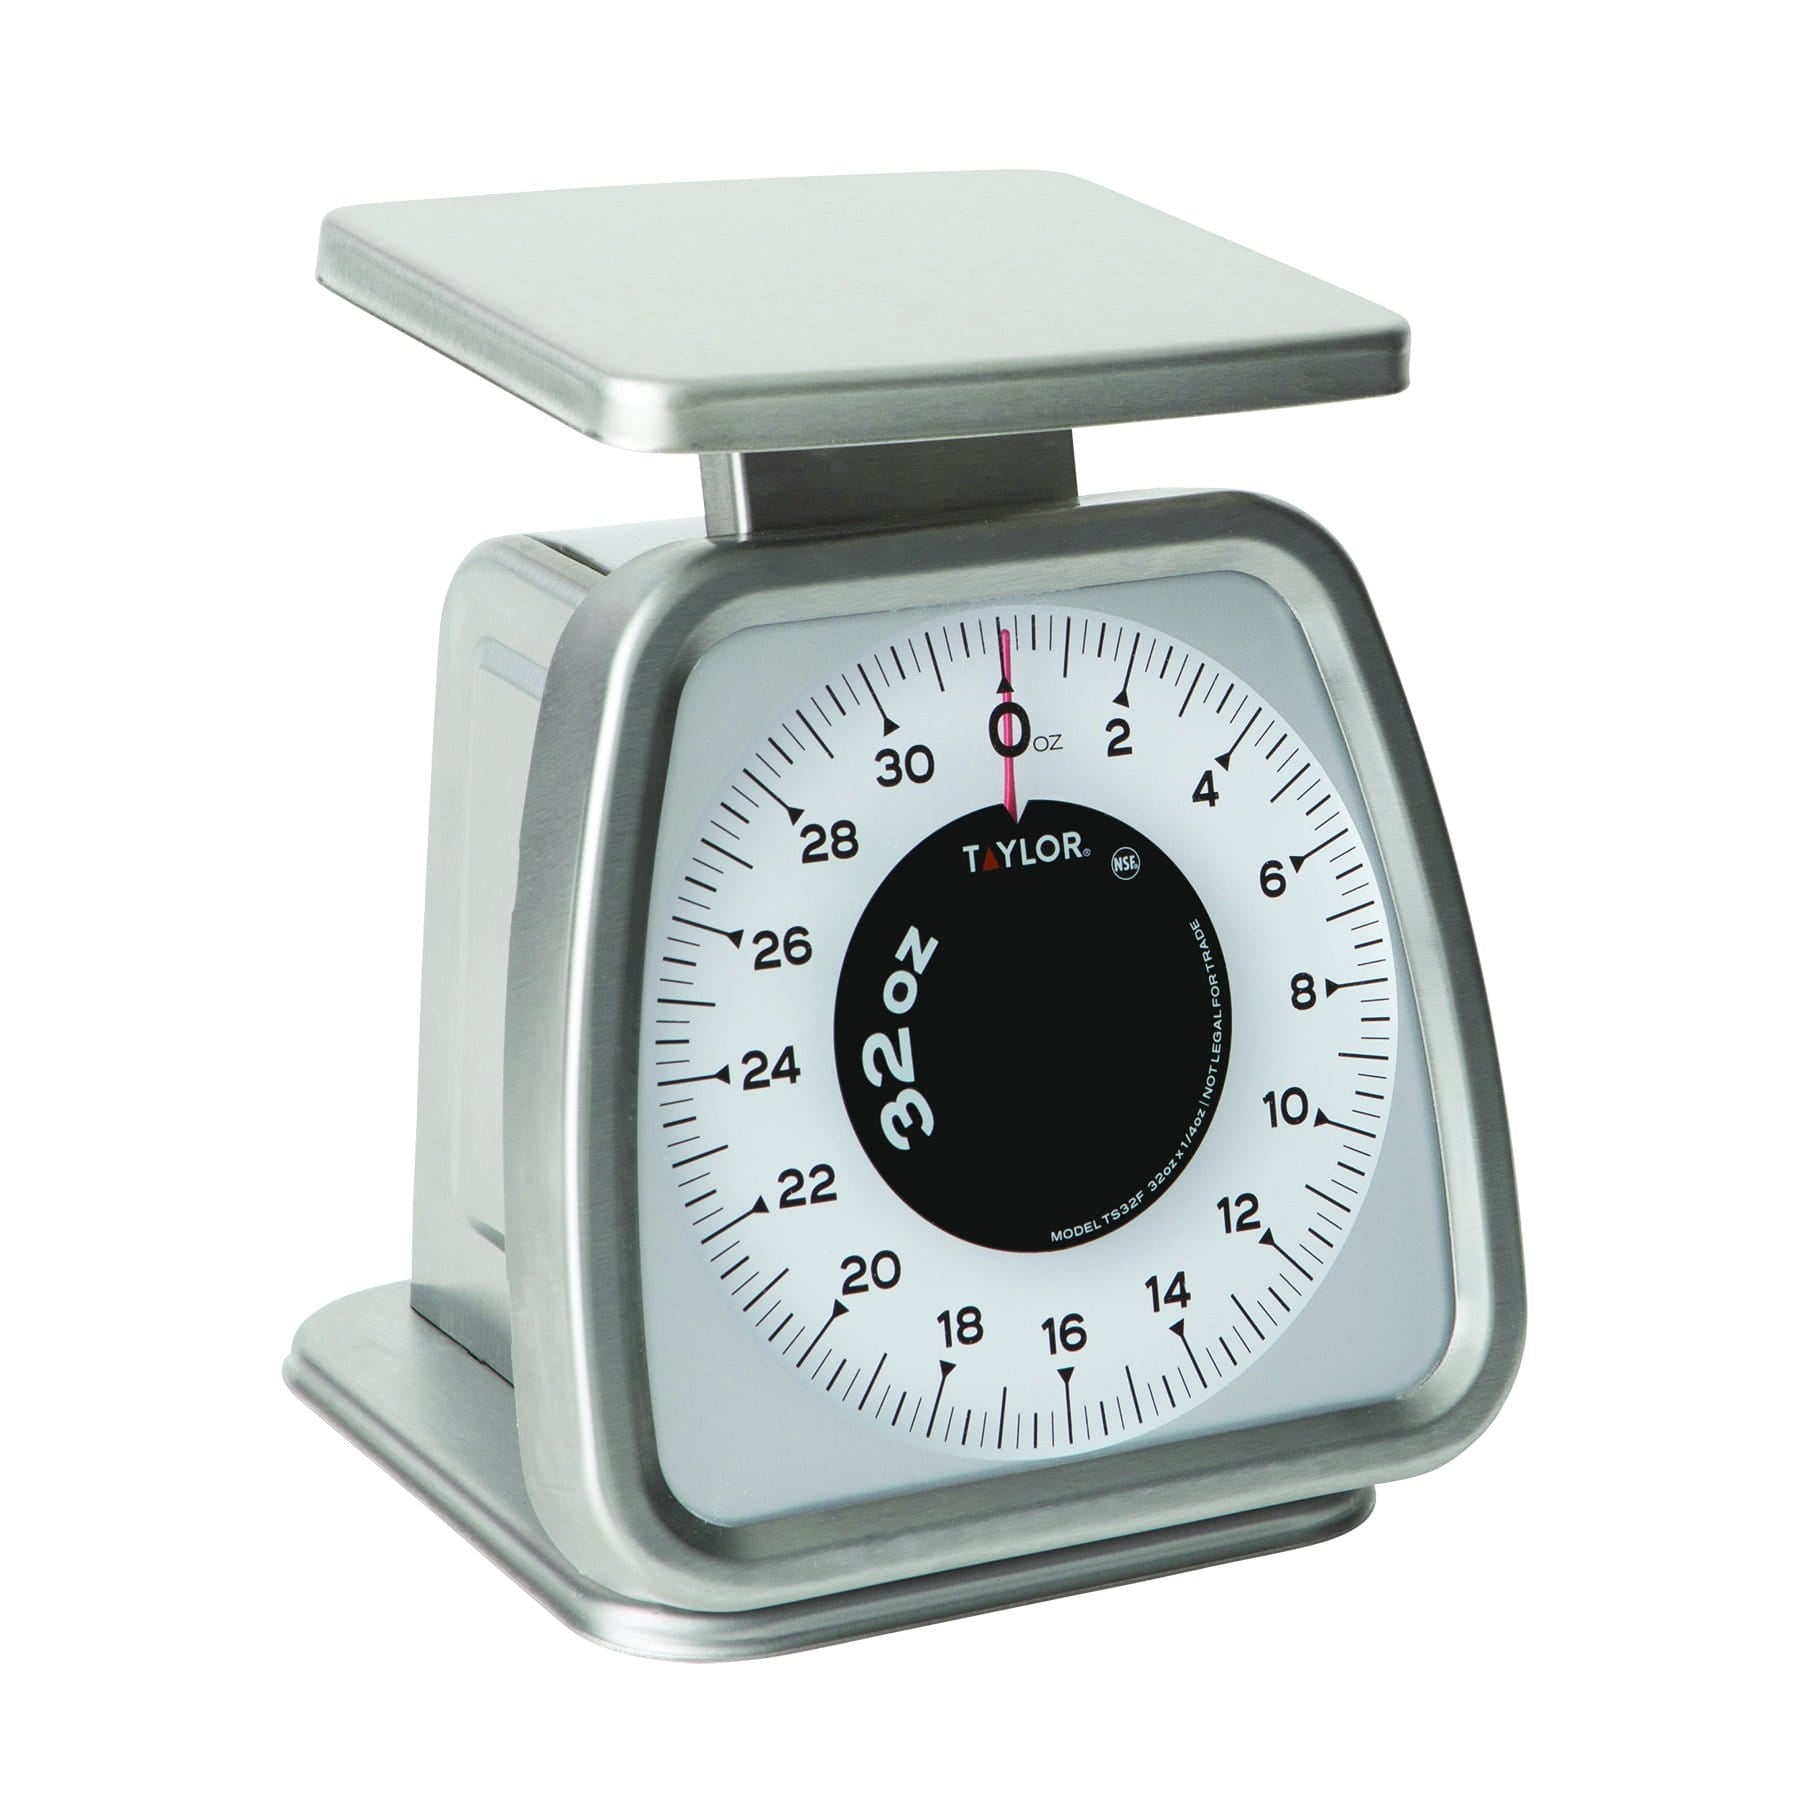 Taylor Mechanical/Analog Kitchen Scale and Food Scale in White